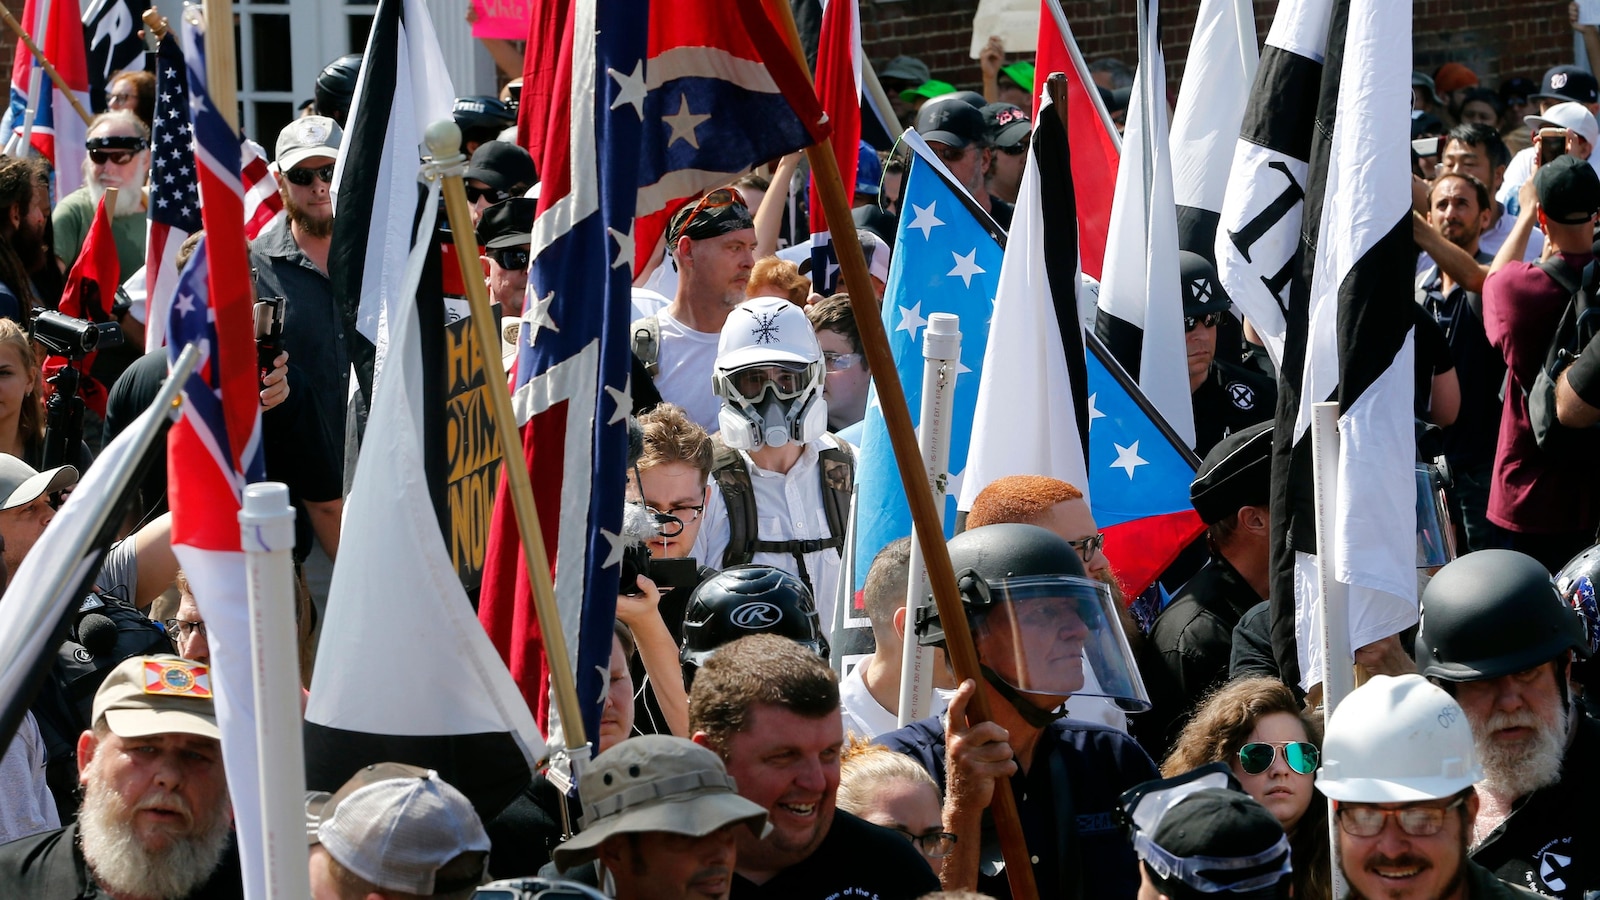 White nationalists ordered by court to pay an additional $2 million for violence at Charlottesville's Unite the Right rally.